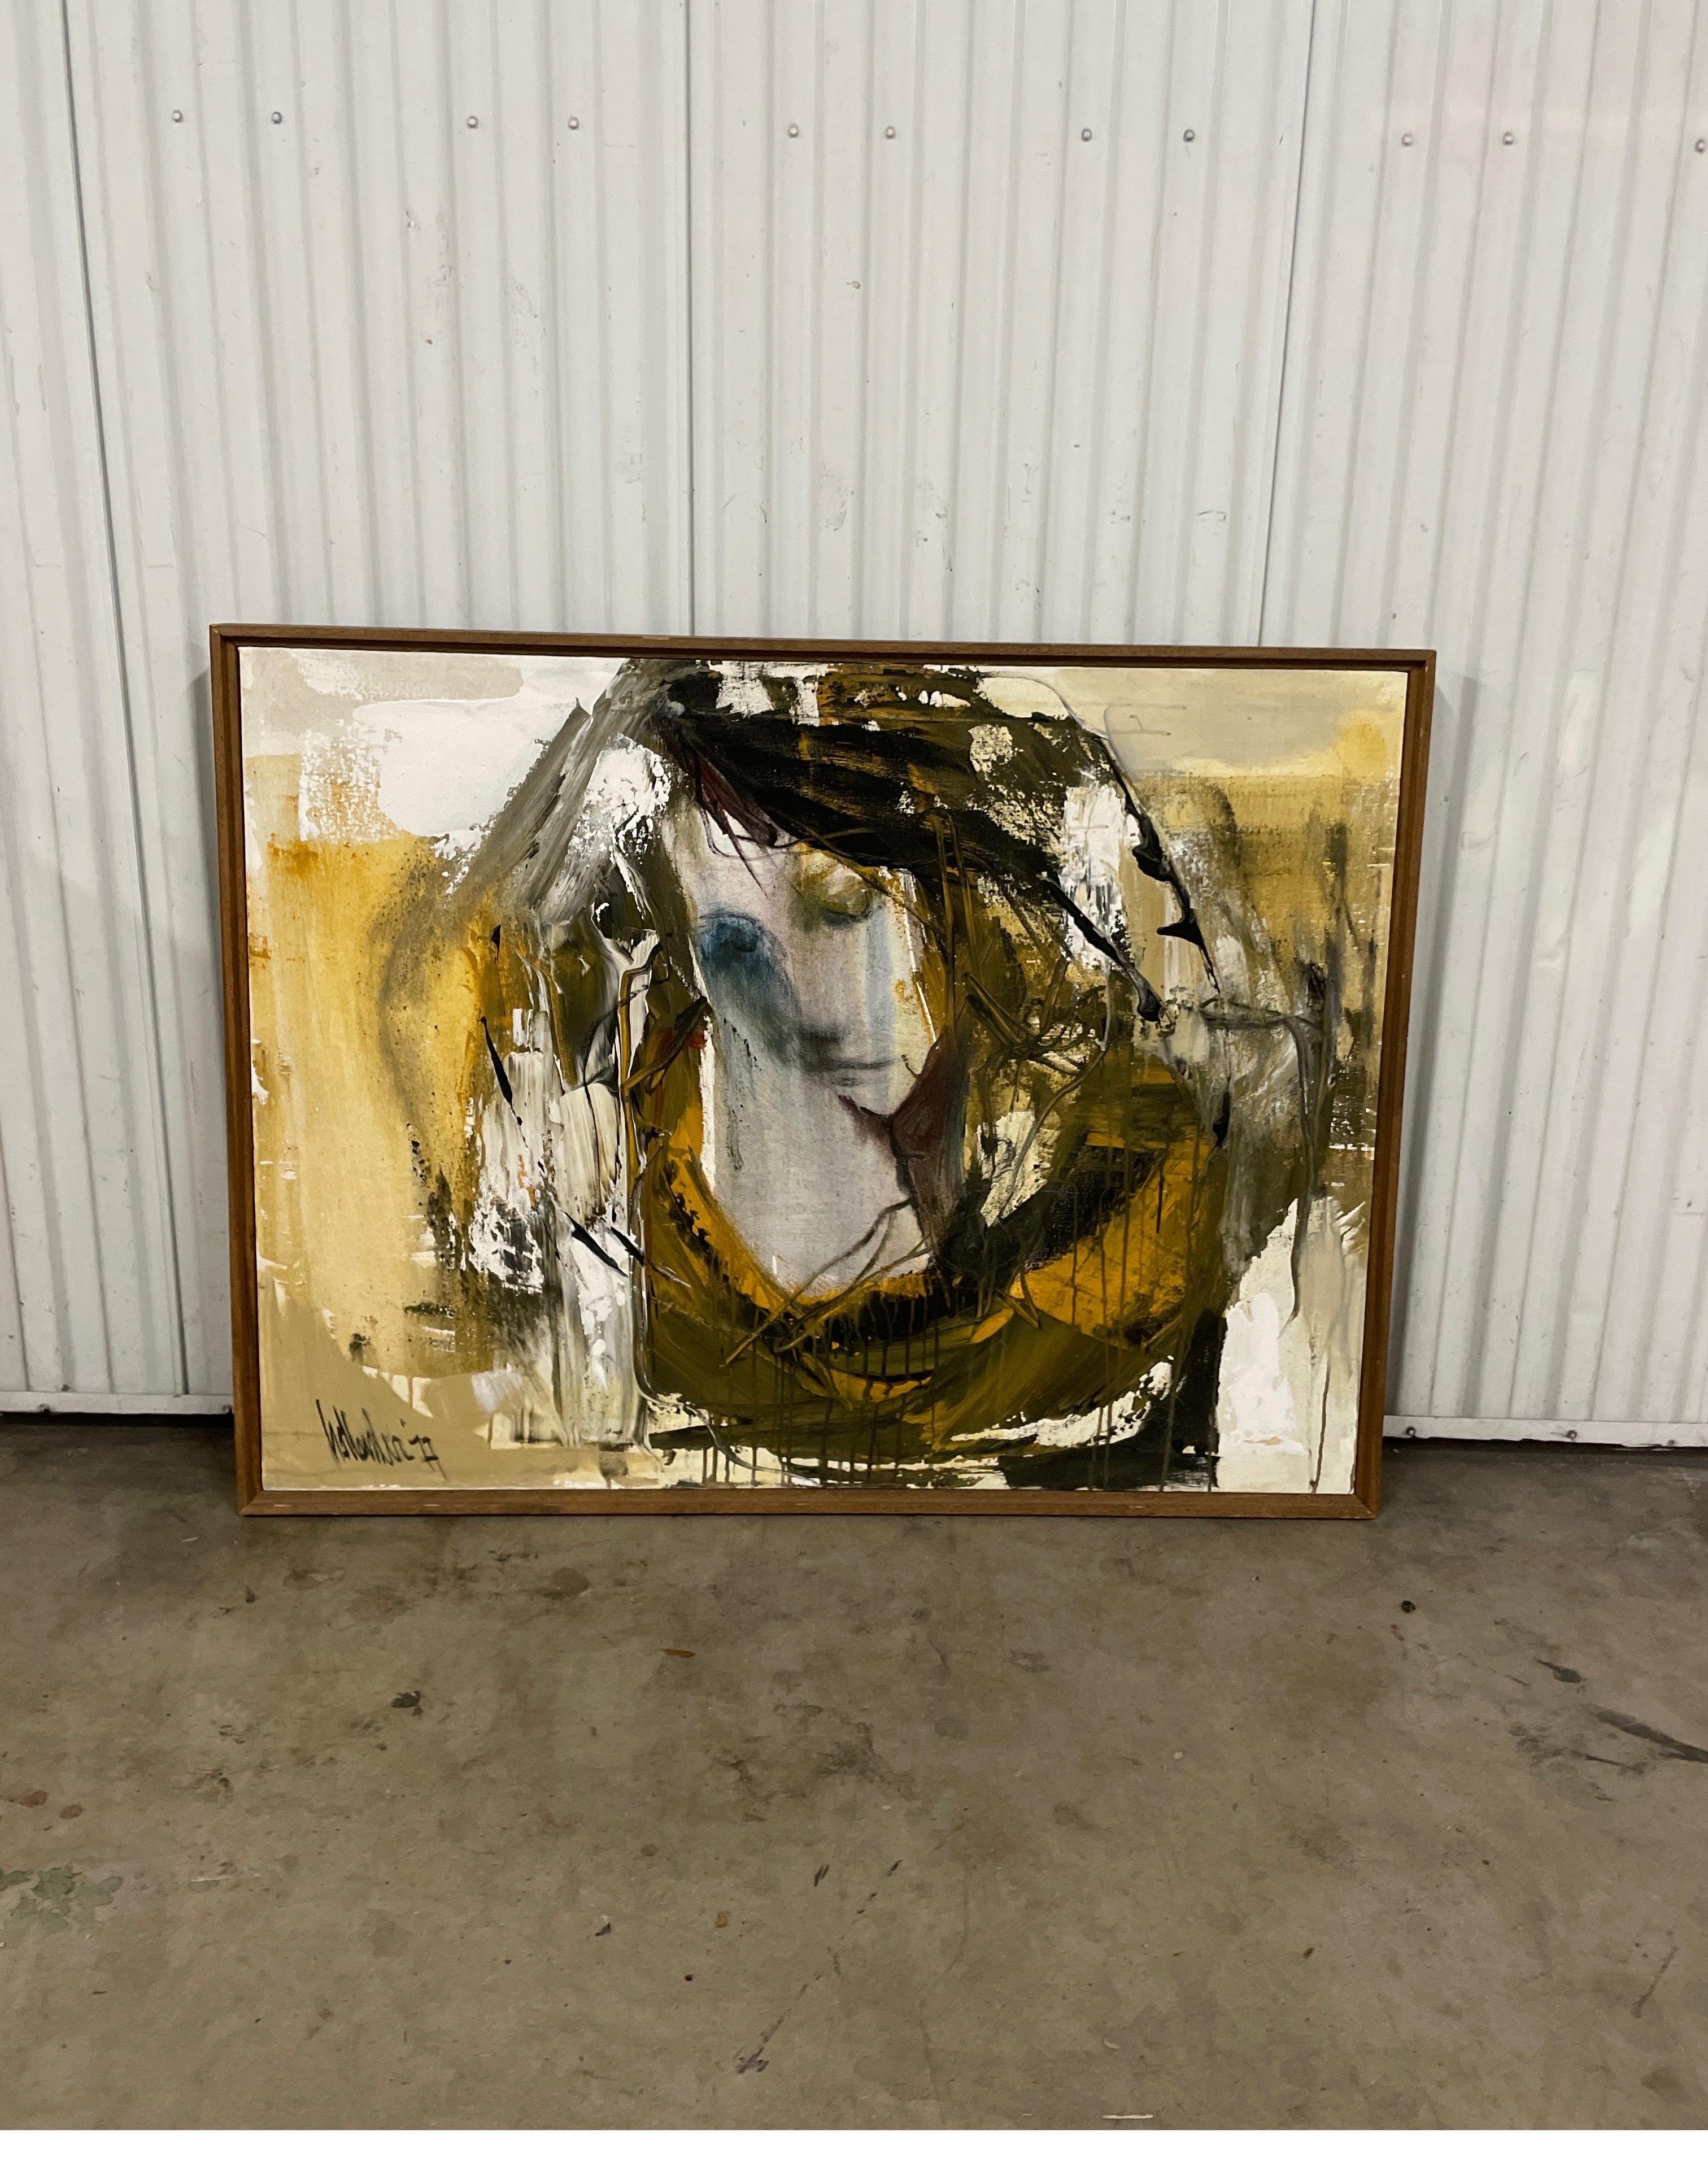 Original oil painting of a woman by Gino Hollander. Wonderful example of his abstract expressionist work. The artist was a favorite of Jackie Kennedy & many other celebrities.